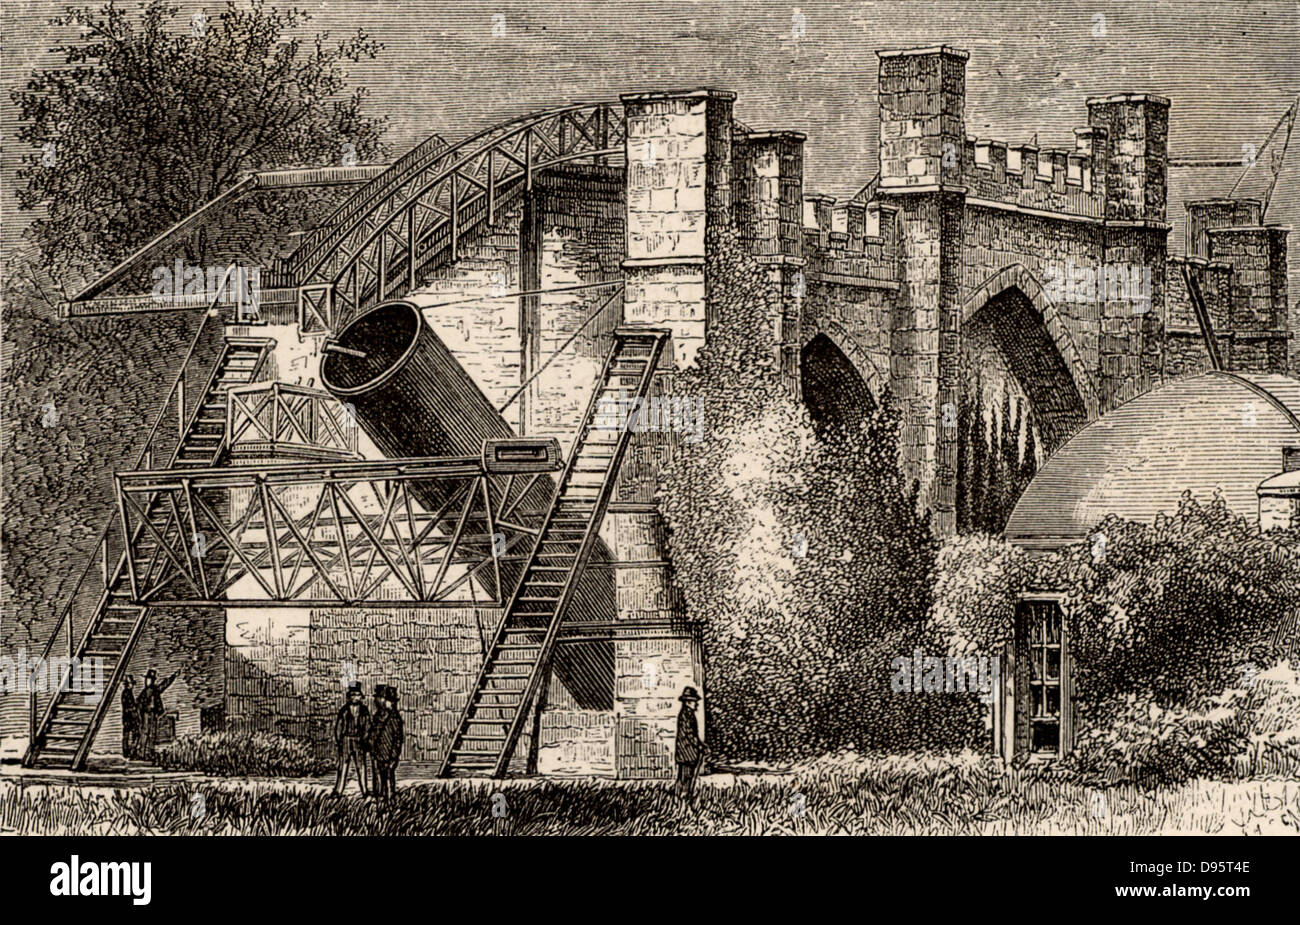 Lord Rosse's great 72-inch (1.828m) diameter reflecting telescope of 1845, called the Leviathan of Parsonstown.  Mounted between two brick walls, it could move only in a north-south direction.  The Earth's rotation provided movement in an east-west direction.  Engraving from 'Astronomie Populaire' by Camille Flammarion (Paris, 1881). William Parsons, 3rd Earl of Rosse (1800-1867). Stock Photo